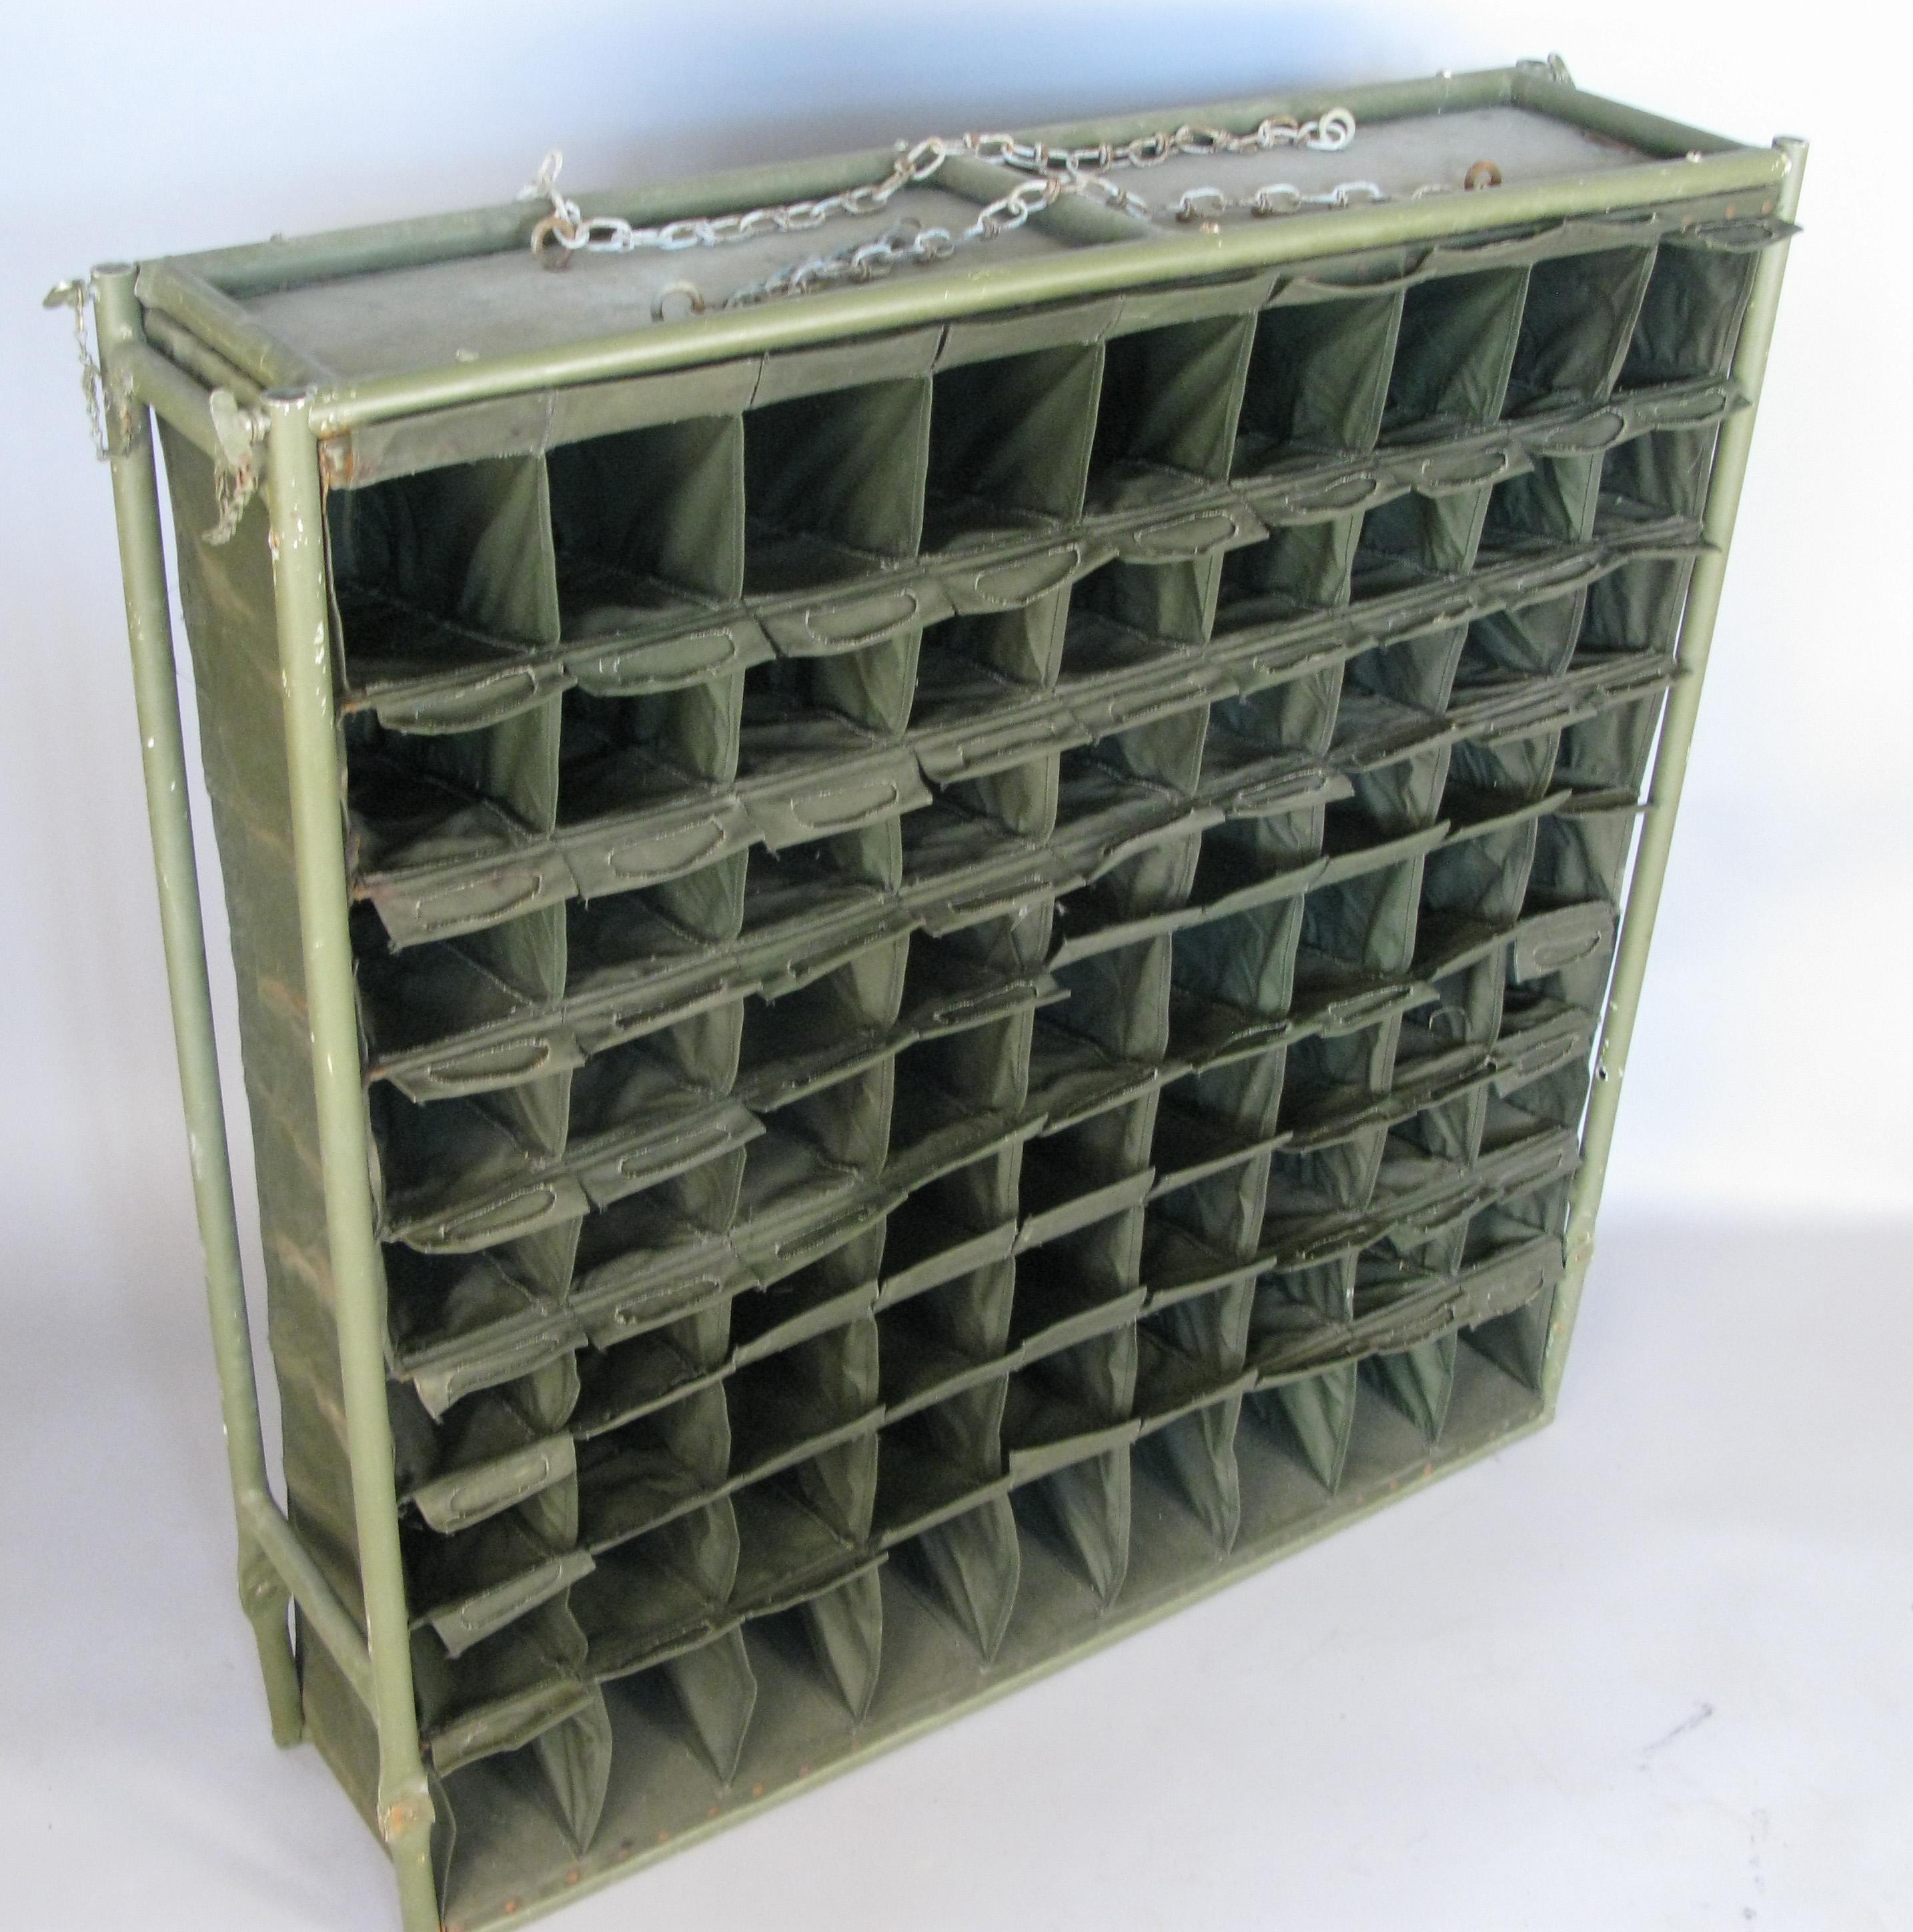 A very cool vintage 1940s folding canvas army mail sorter, designed to be transported and used in the field - mades a terrific and unusual wine rack. Metal frame and canvas centre. Shows age expected wear.